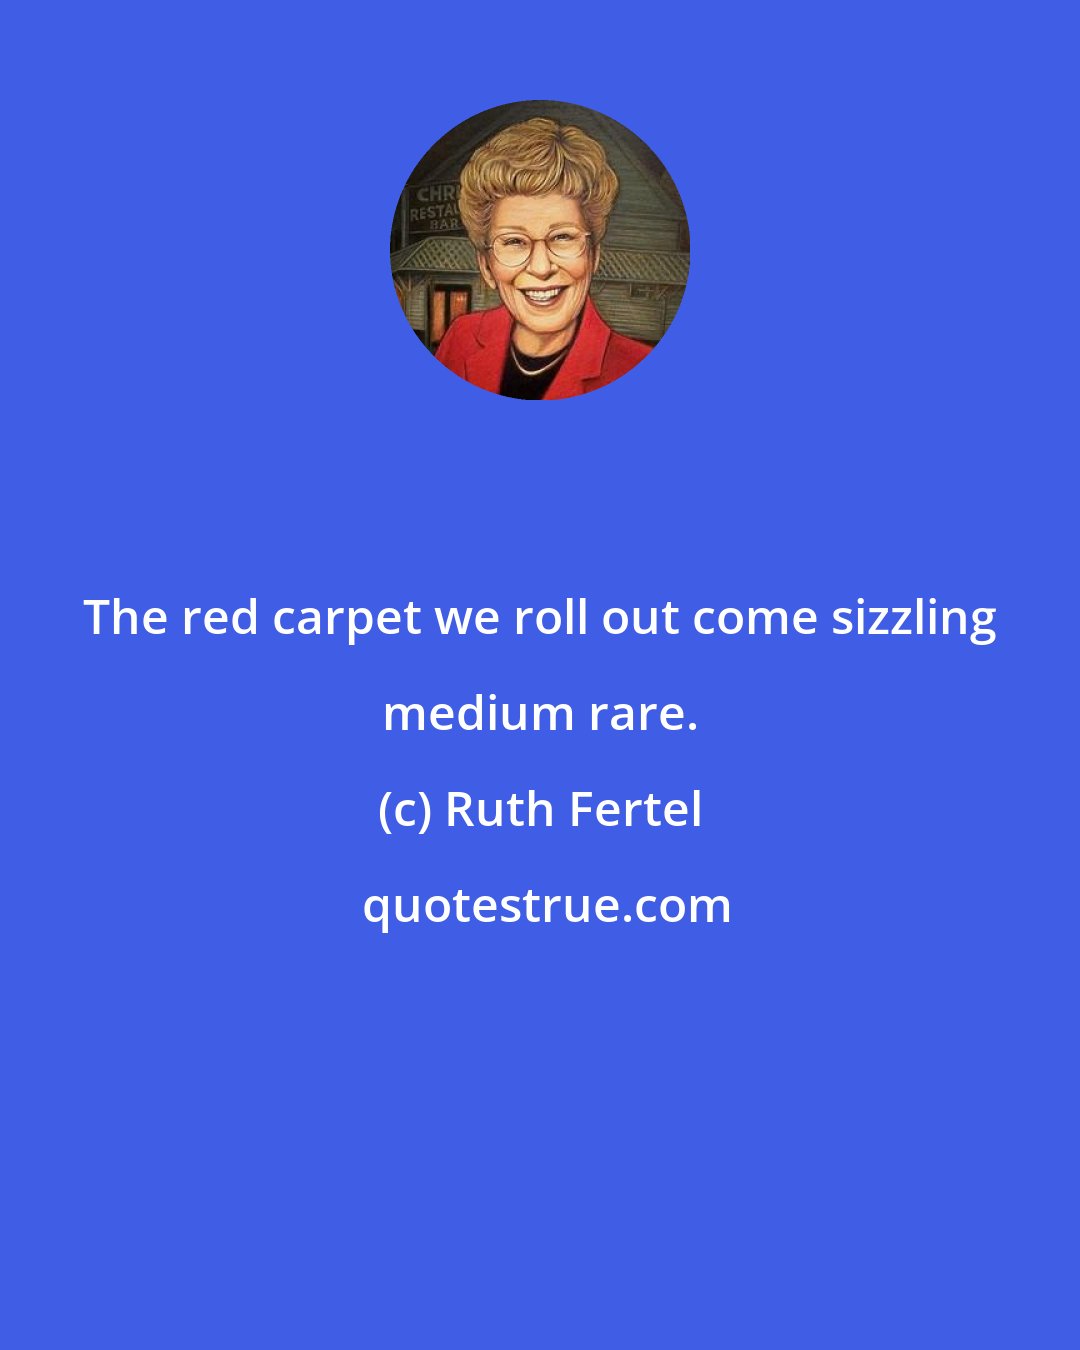 Ruth Fertel: The red carpet we roll out come sizzling medium rare.